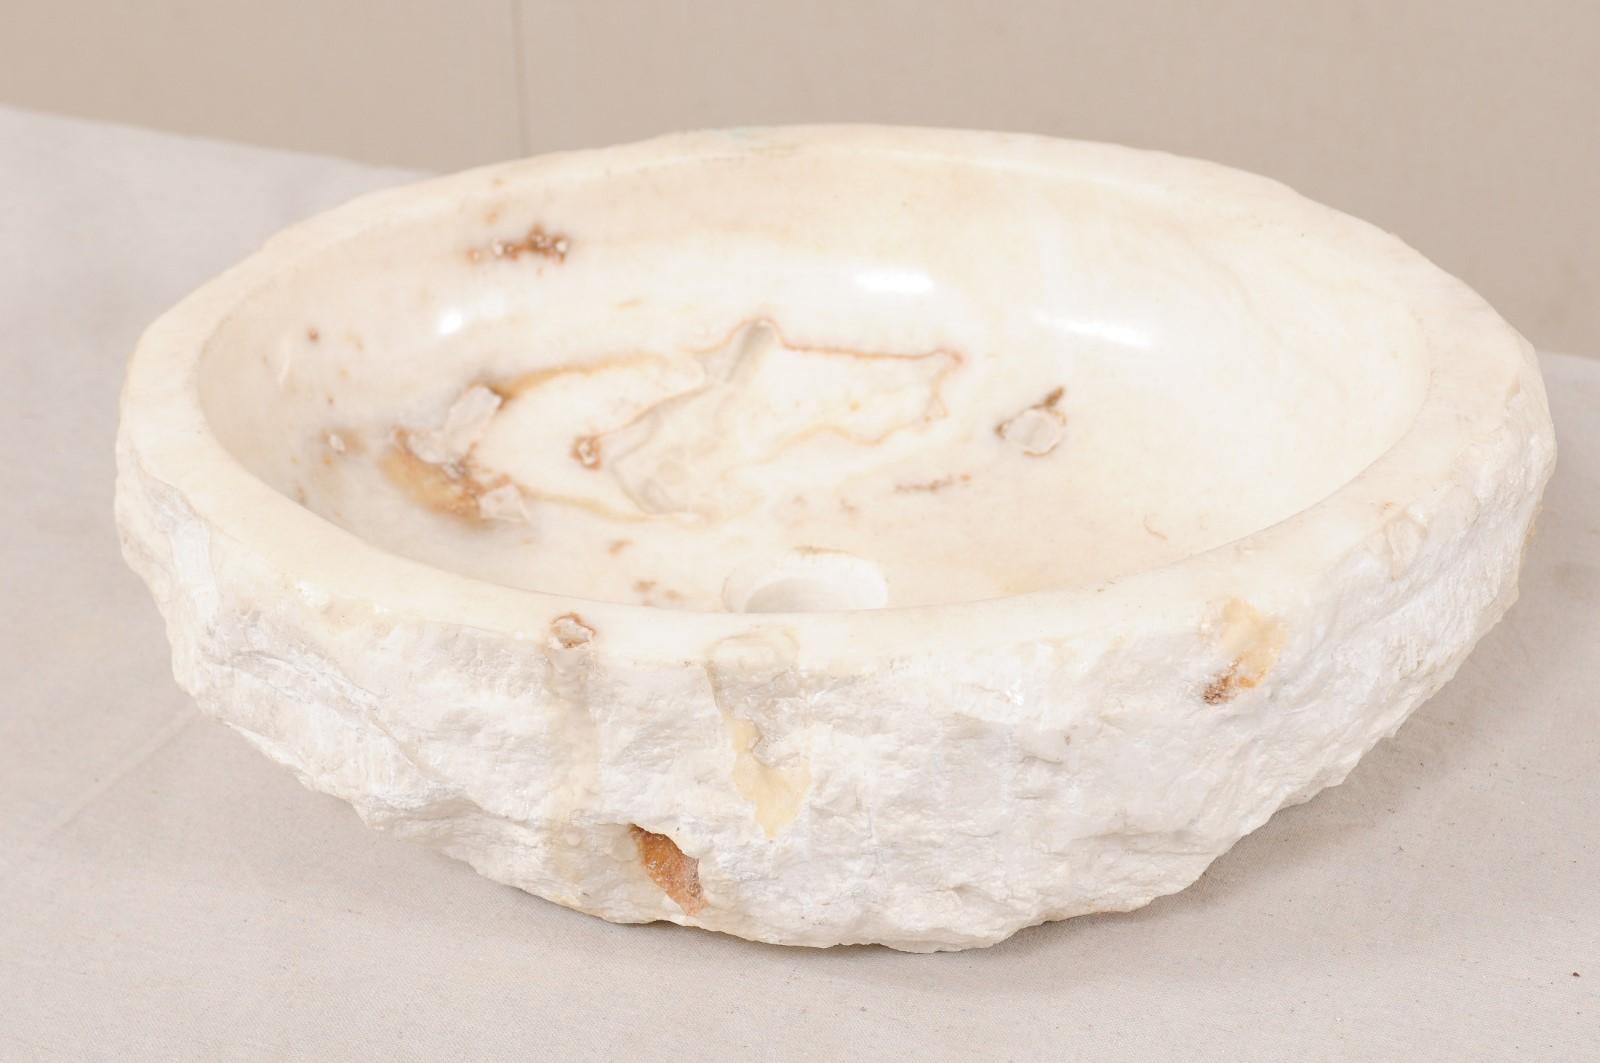 Carved and Polished Creamy White Onyx Stone Sink Basin 5